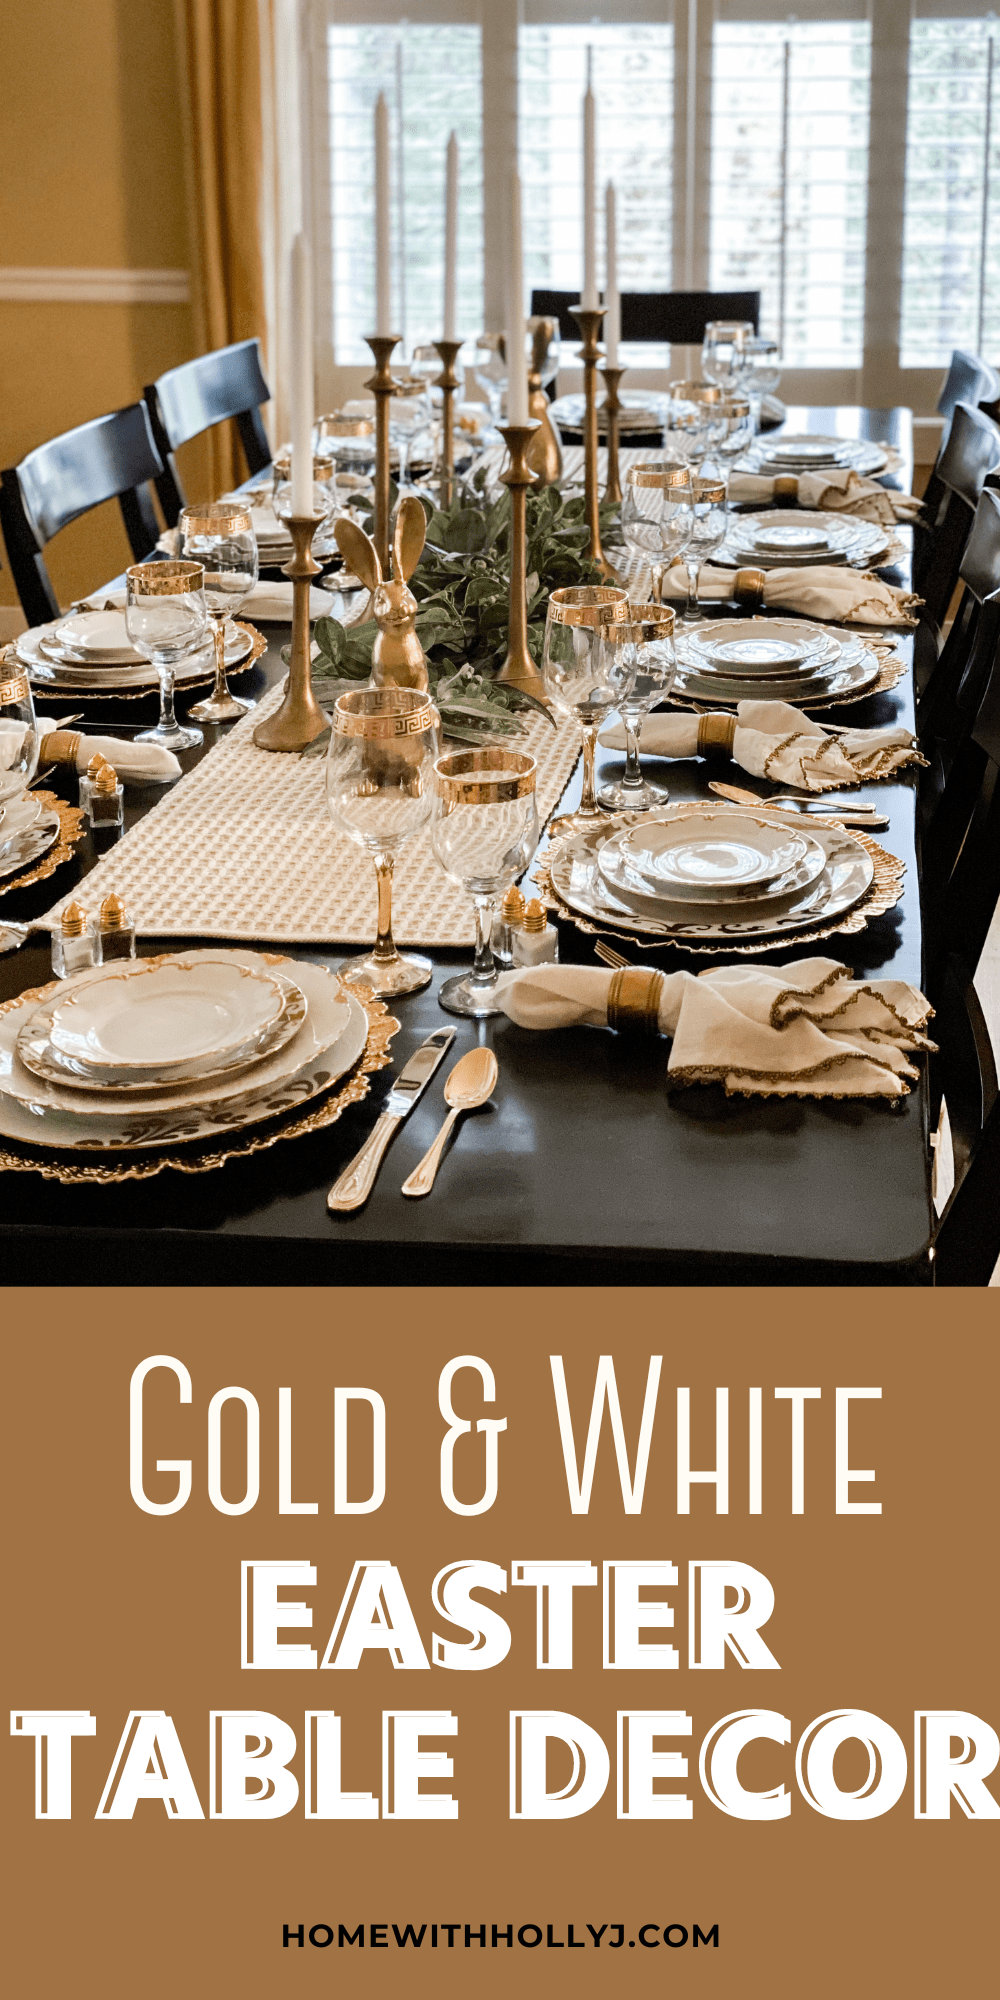 Transform your Easter gathering into a luxurious affair with stunning gold and white elegant Easter Table Decor. Learn how here.